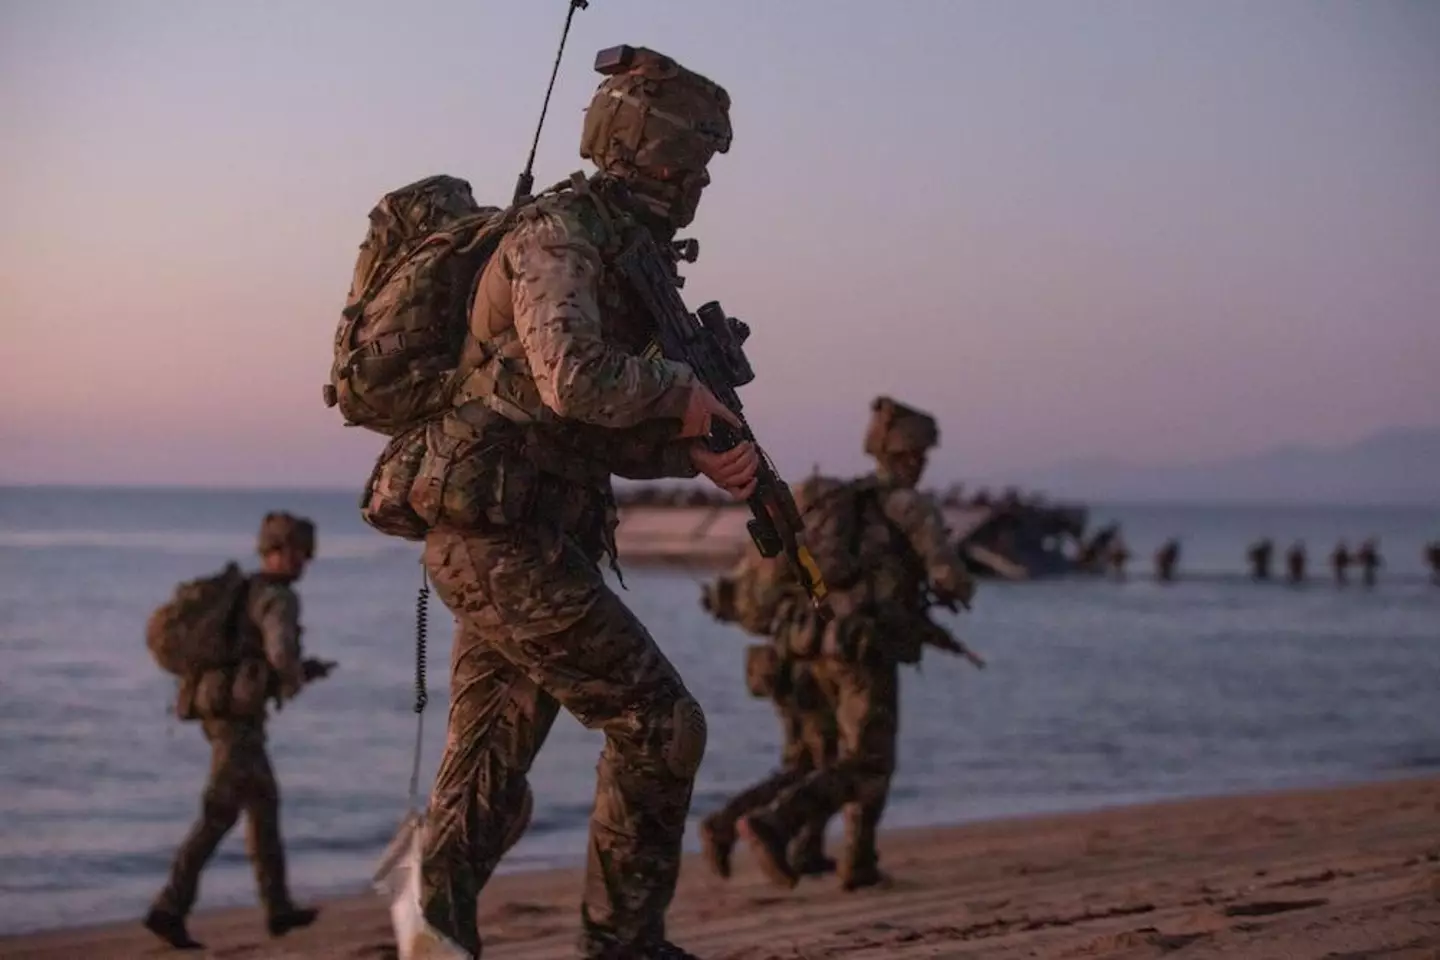 A group of bemused fishermen noticed the 30 commandos making their way up the beach.